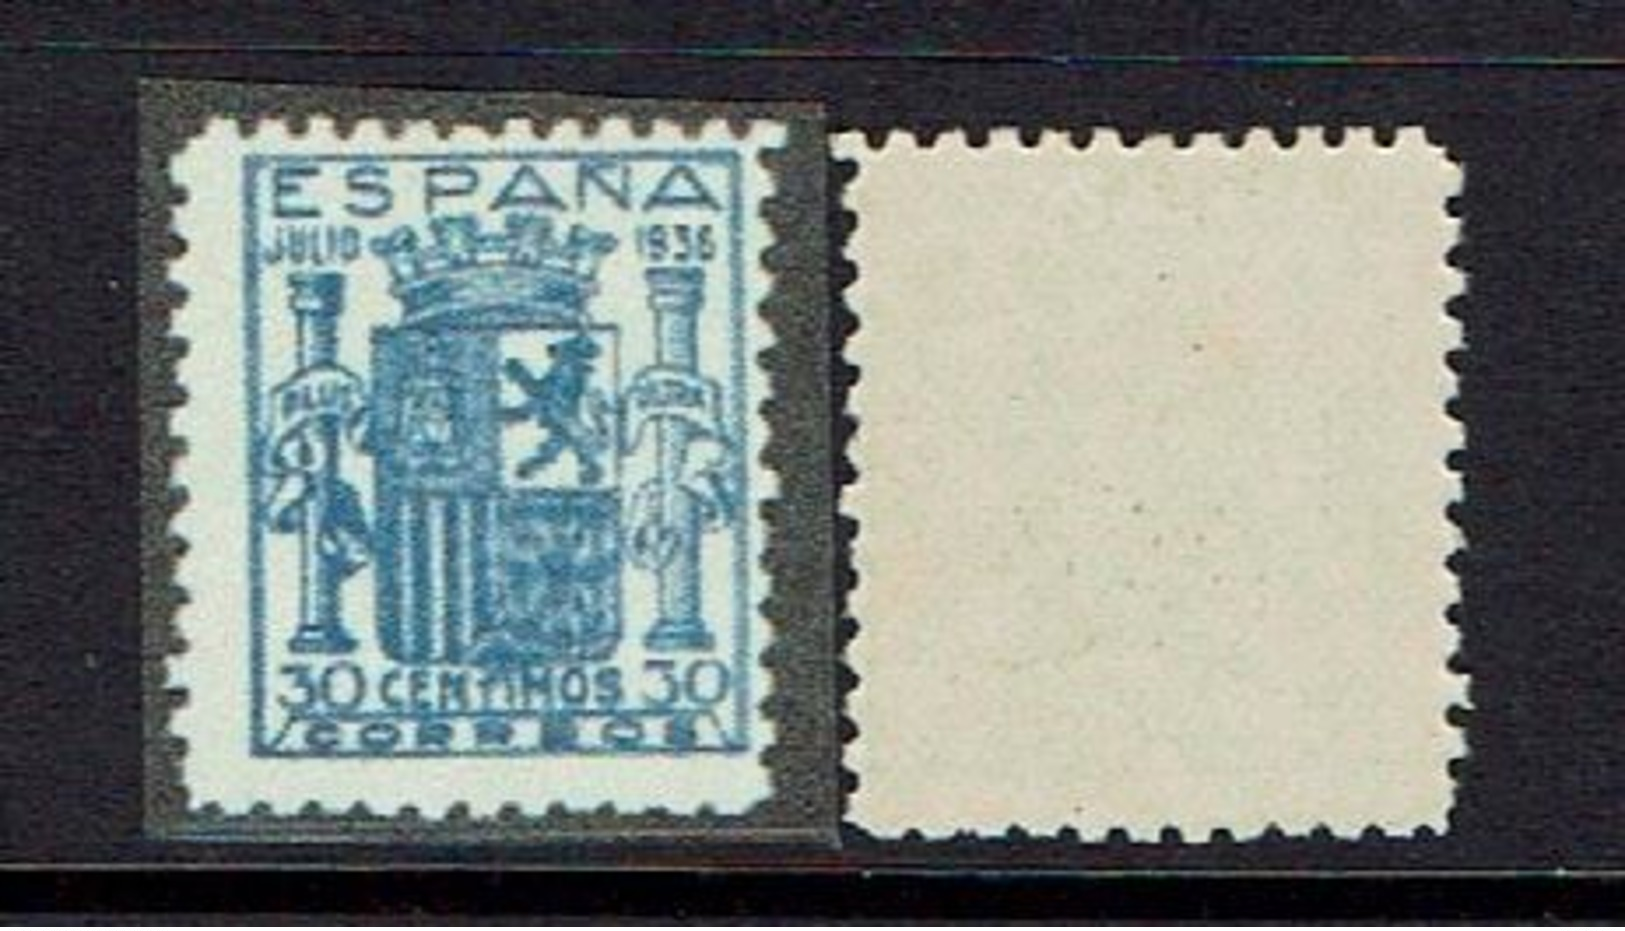 SPAIN...1936...sCOTT # 617...perforated...full Gum...EXTREMELY RARE FIND - Unused Stamps